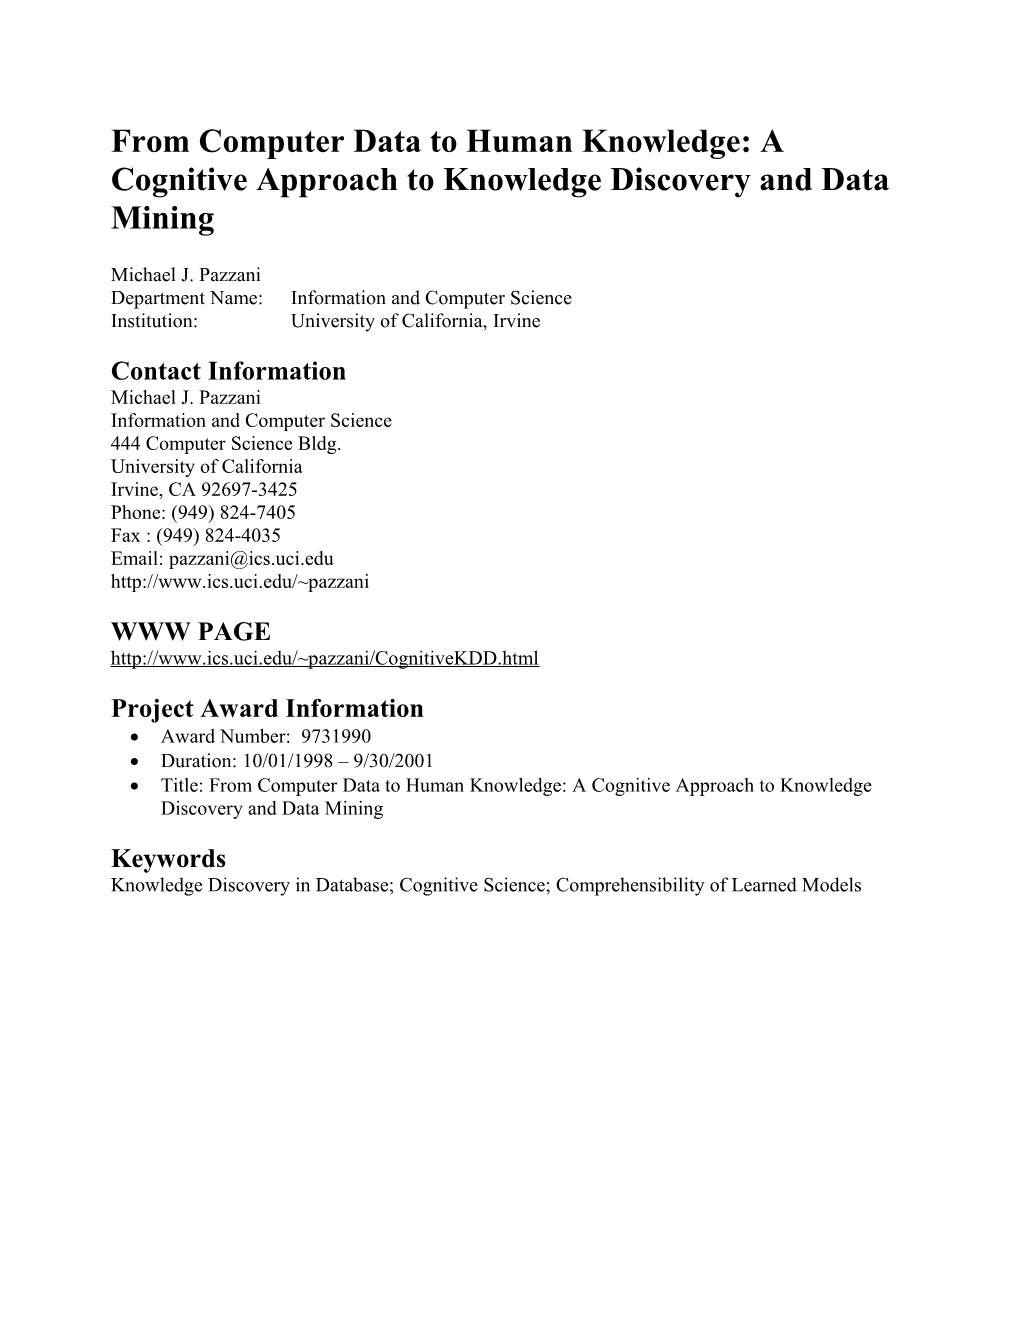 From Computer Data to Human Knowledge: a Cognitive Approach to Knowledge Discovery And